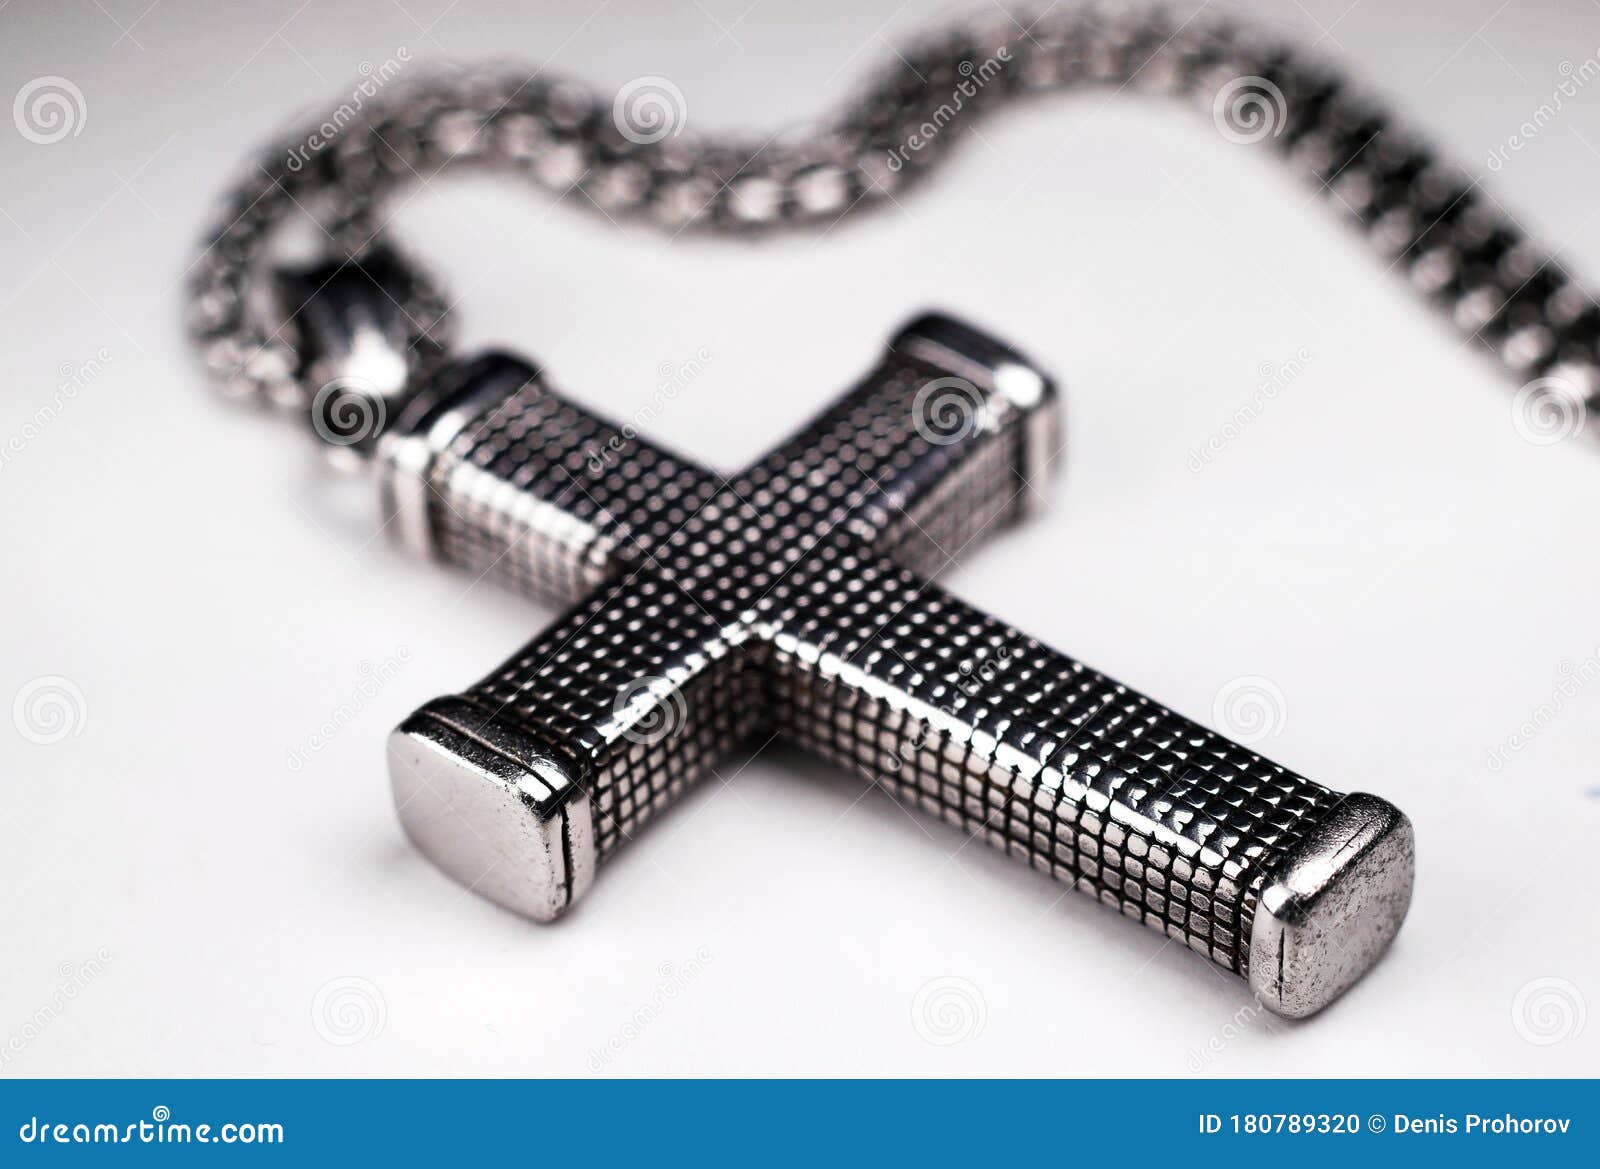 Metal Cross To Wear Around the Neck Stock Photo - Image of necklace ...